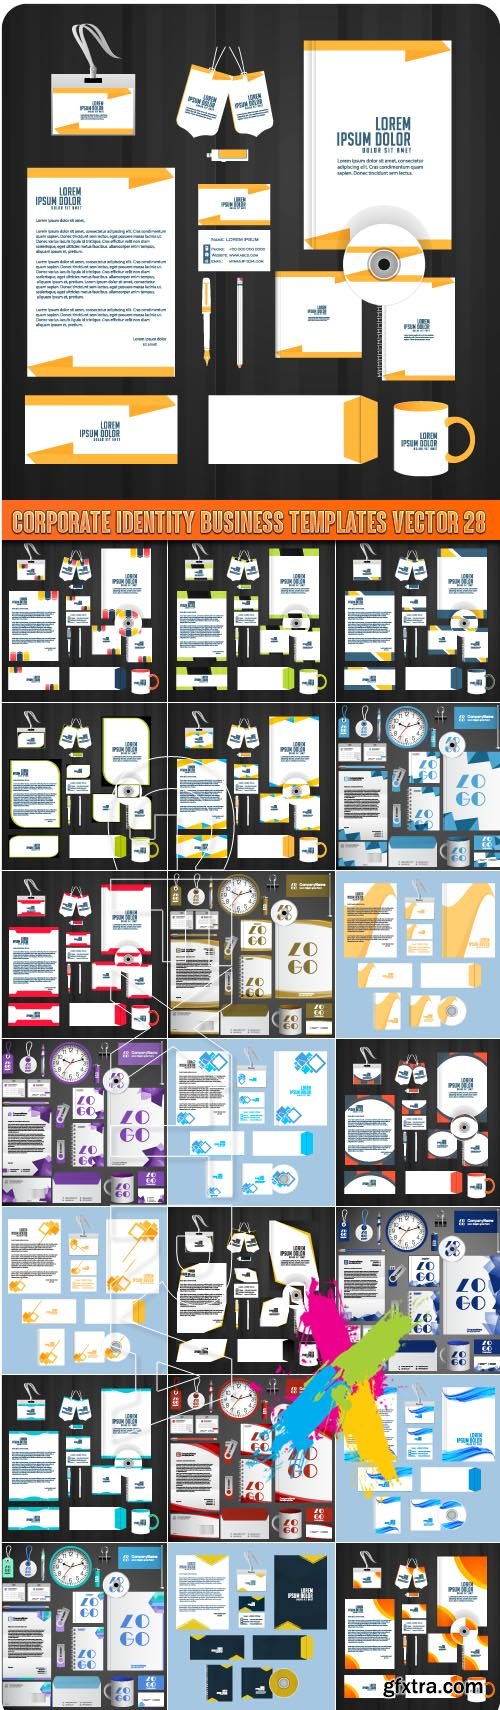 Corporate identity business templates vector 28